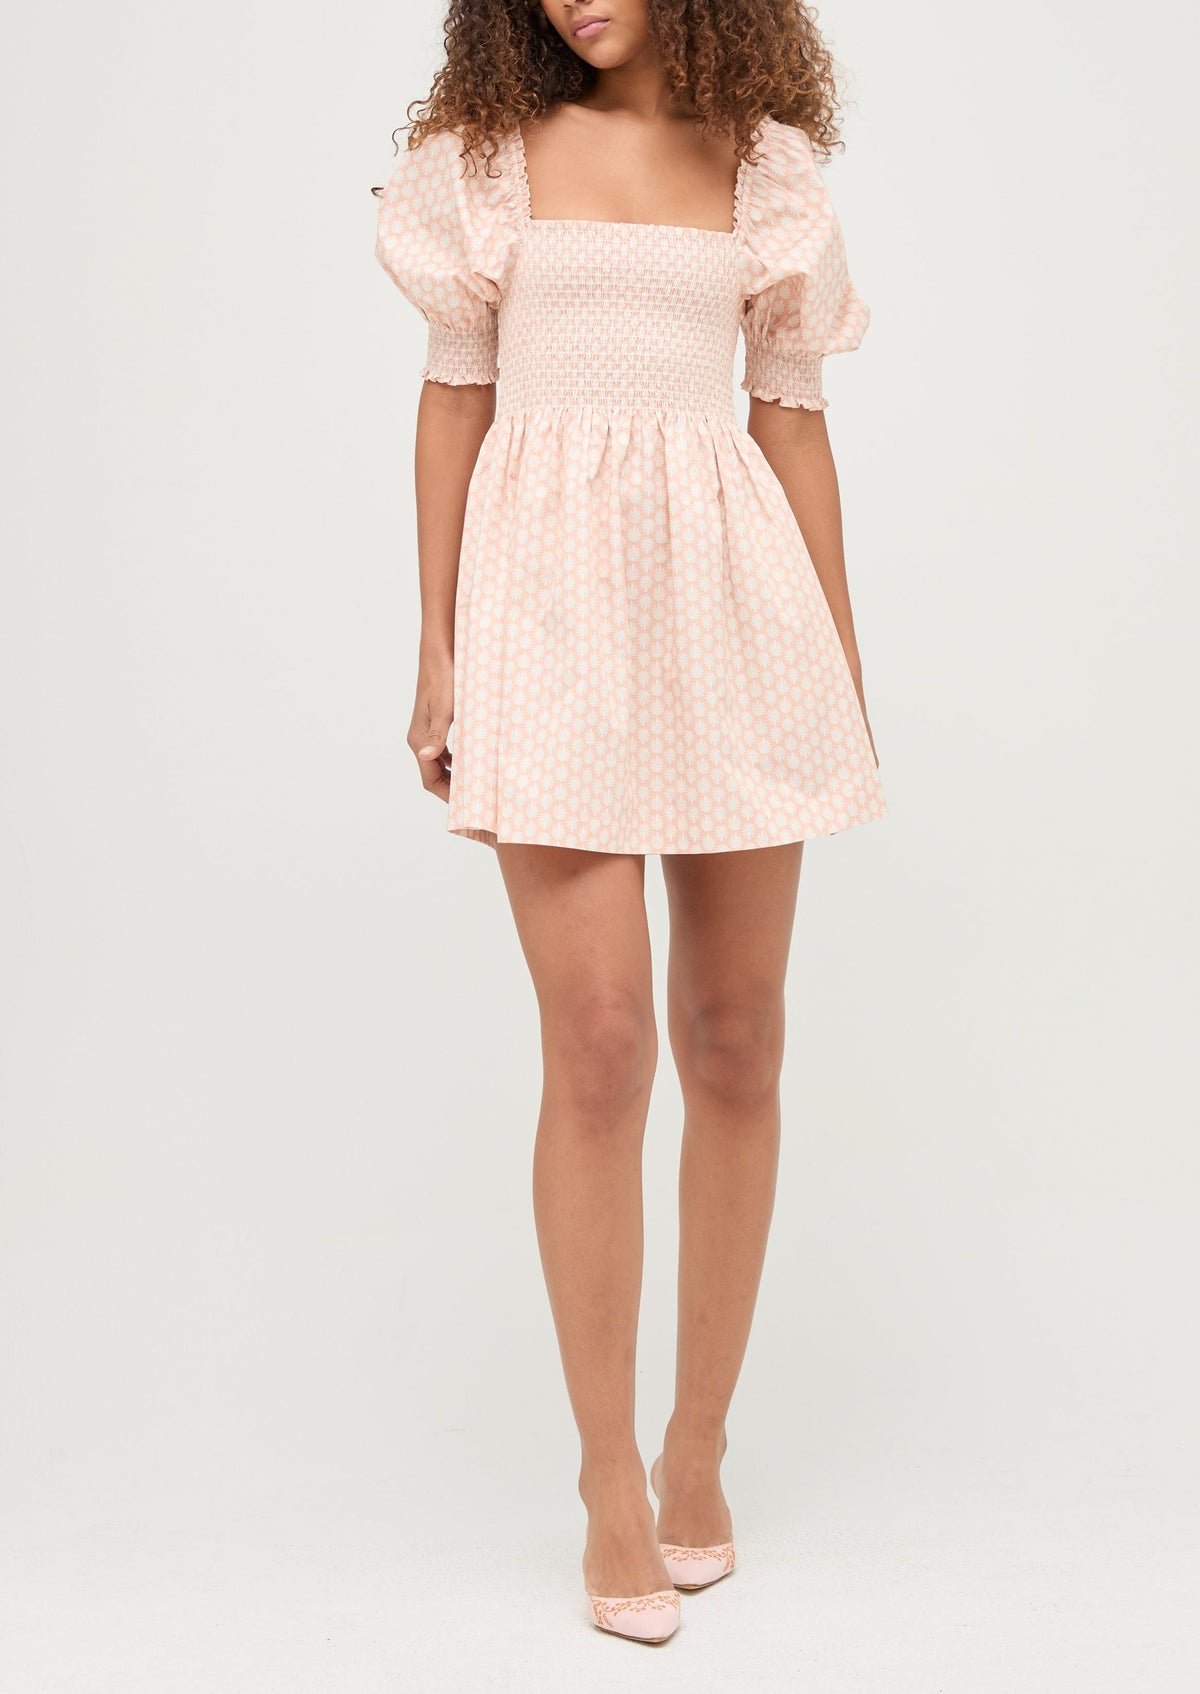 The Athena Nap Dress in Coral Baroque Shell Cotton Sateen